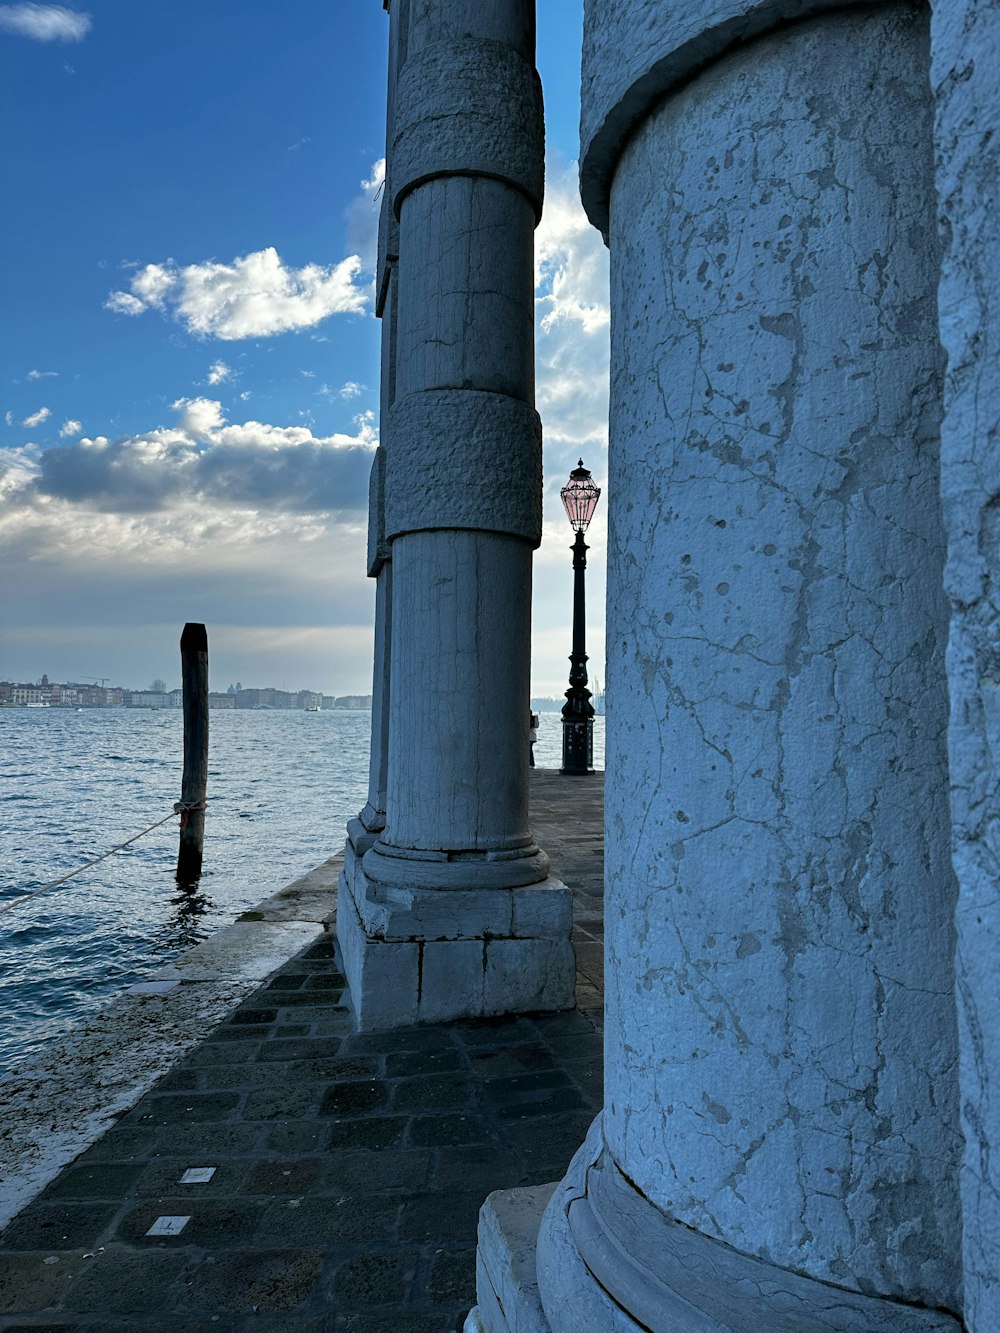 a couple of pillars sitting next to a body of water